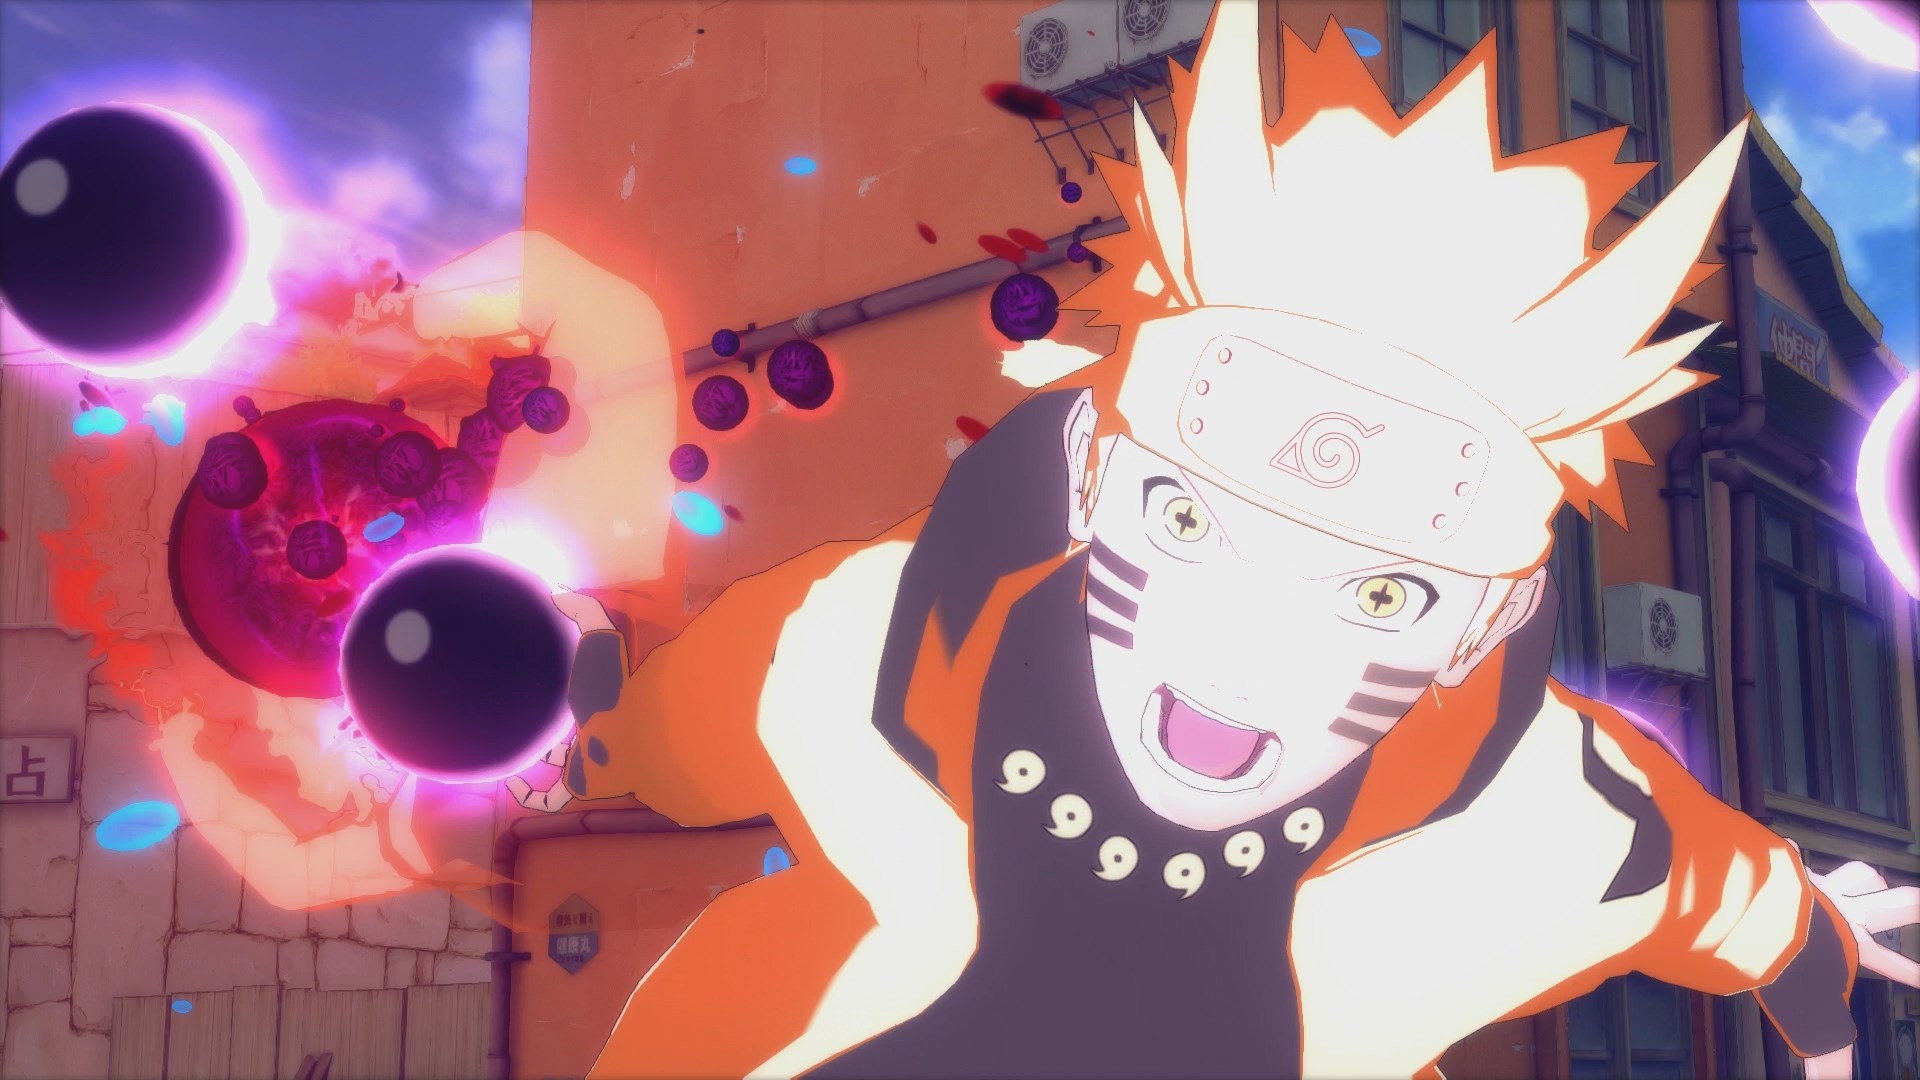 Buy Naruto Shippuden Ultimate Ninja STORM Legacy Steam Key, Instant  Delivery